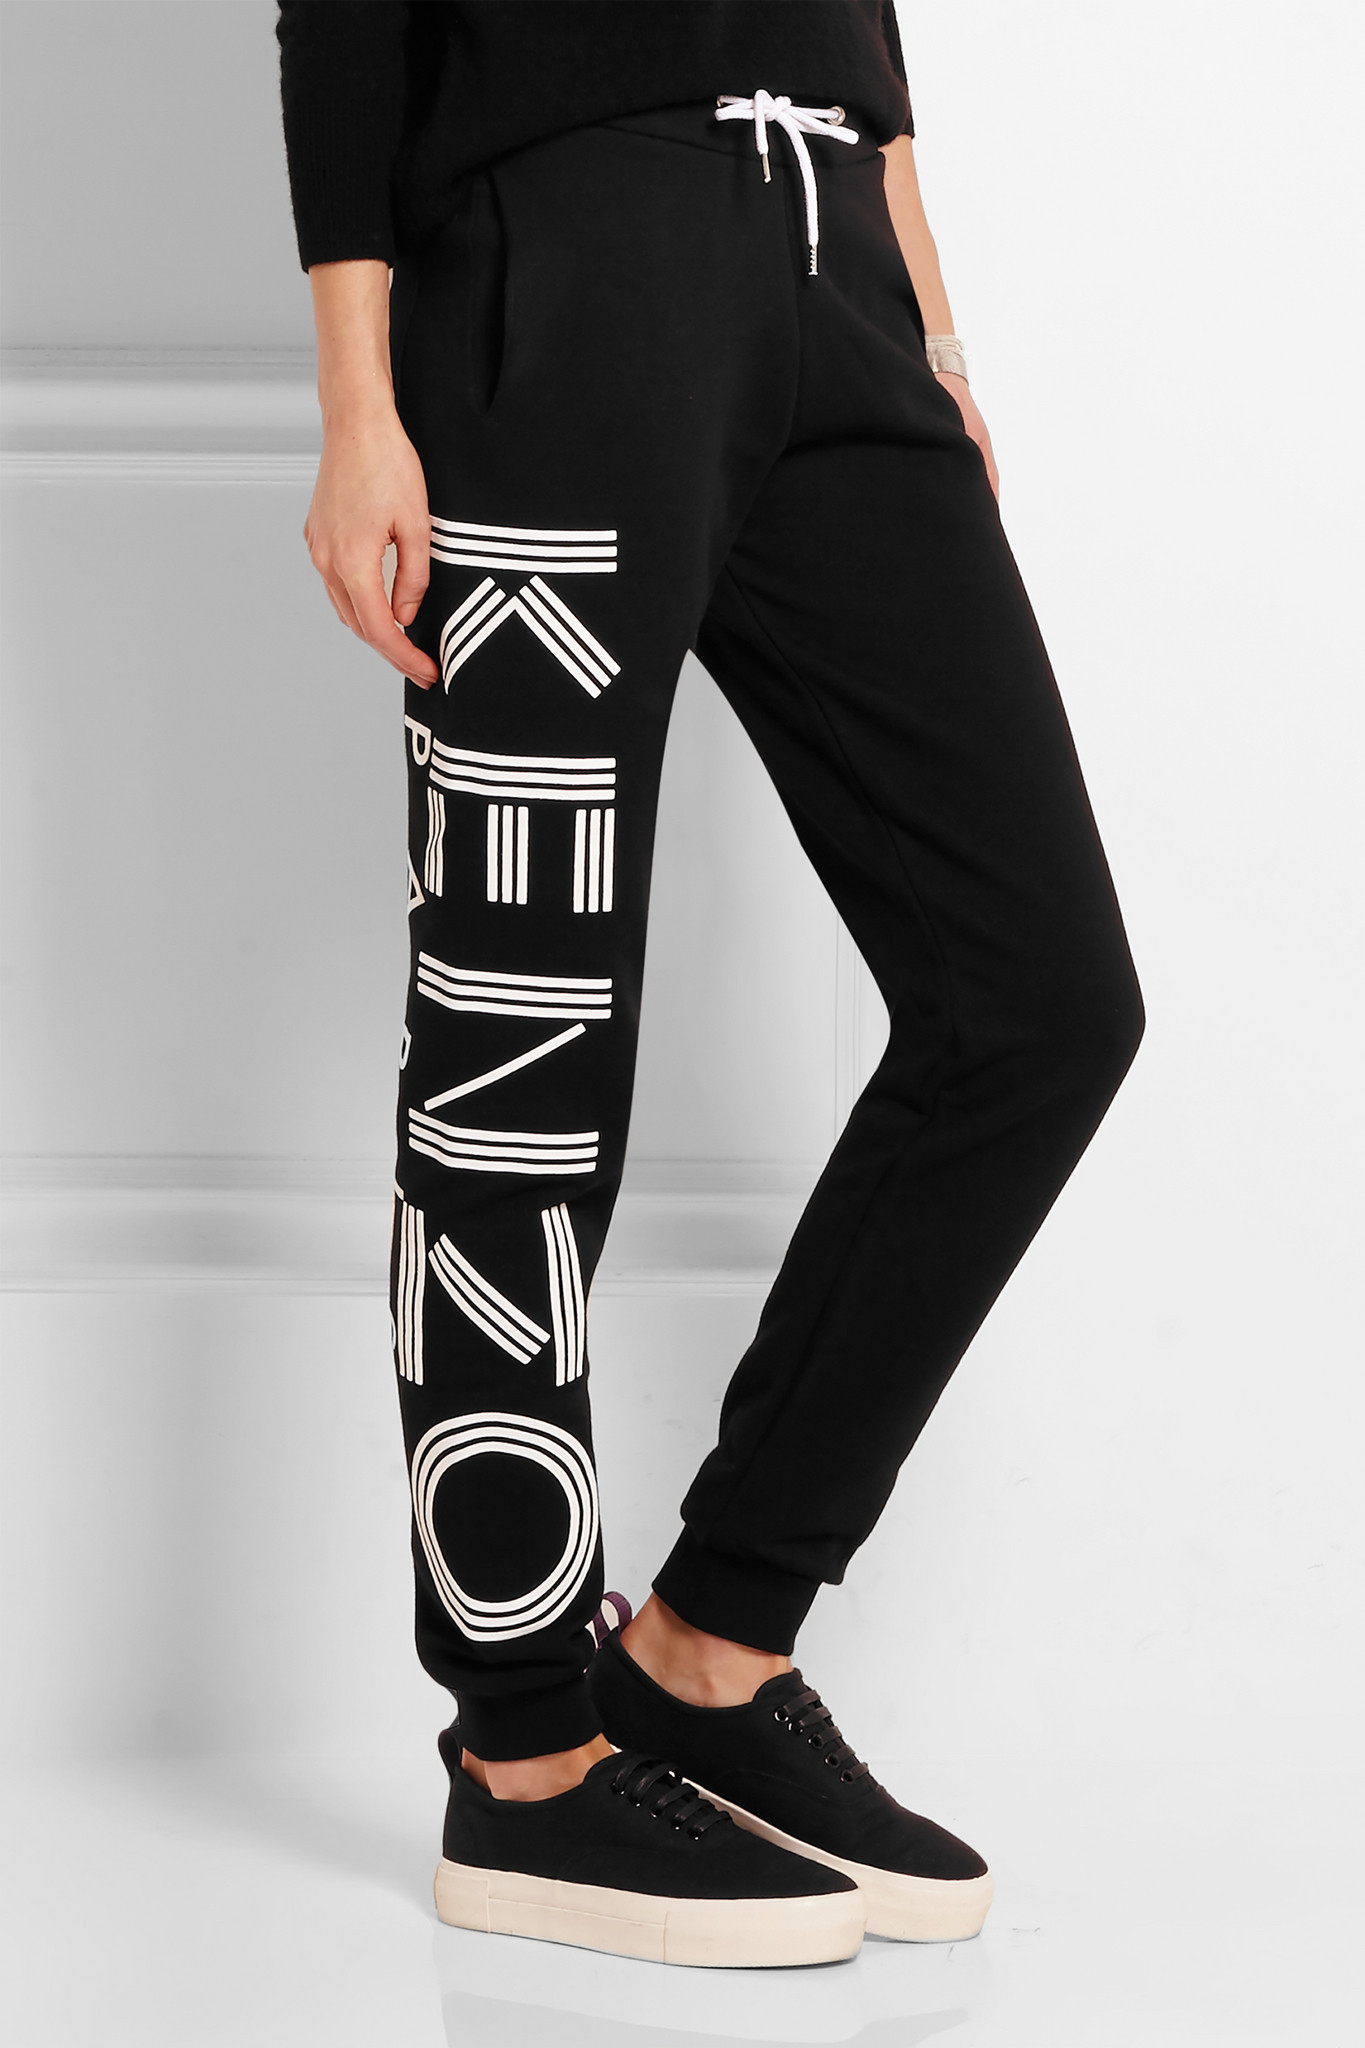 KENZO Printed Cotton Track Pants in Black - Lyst